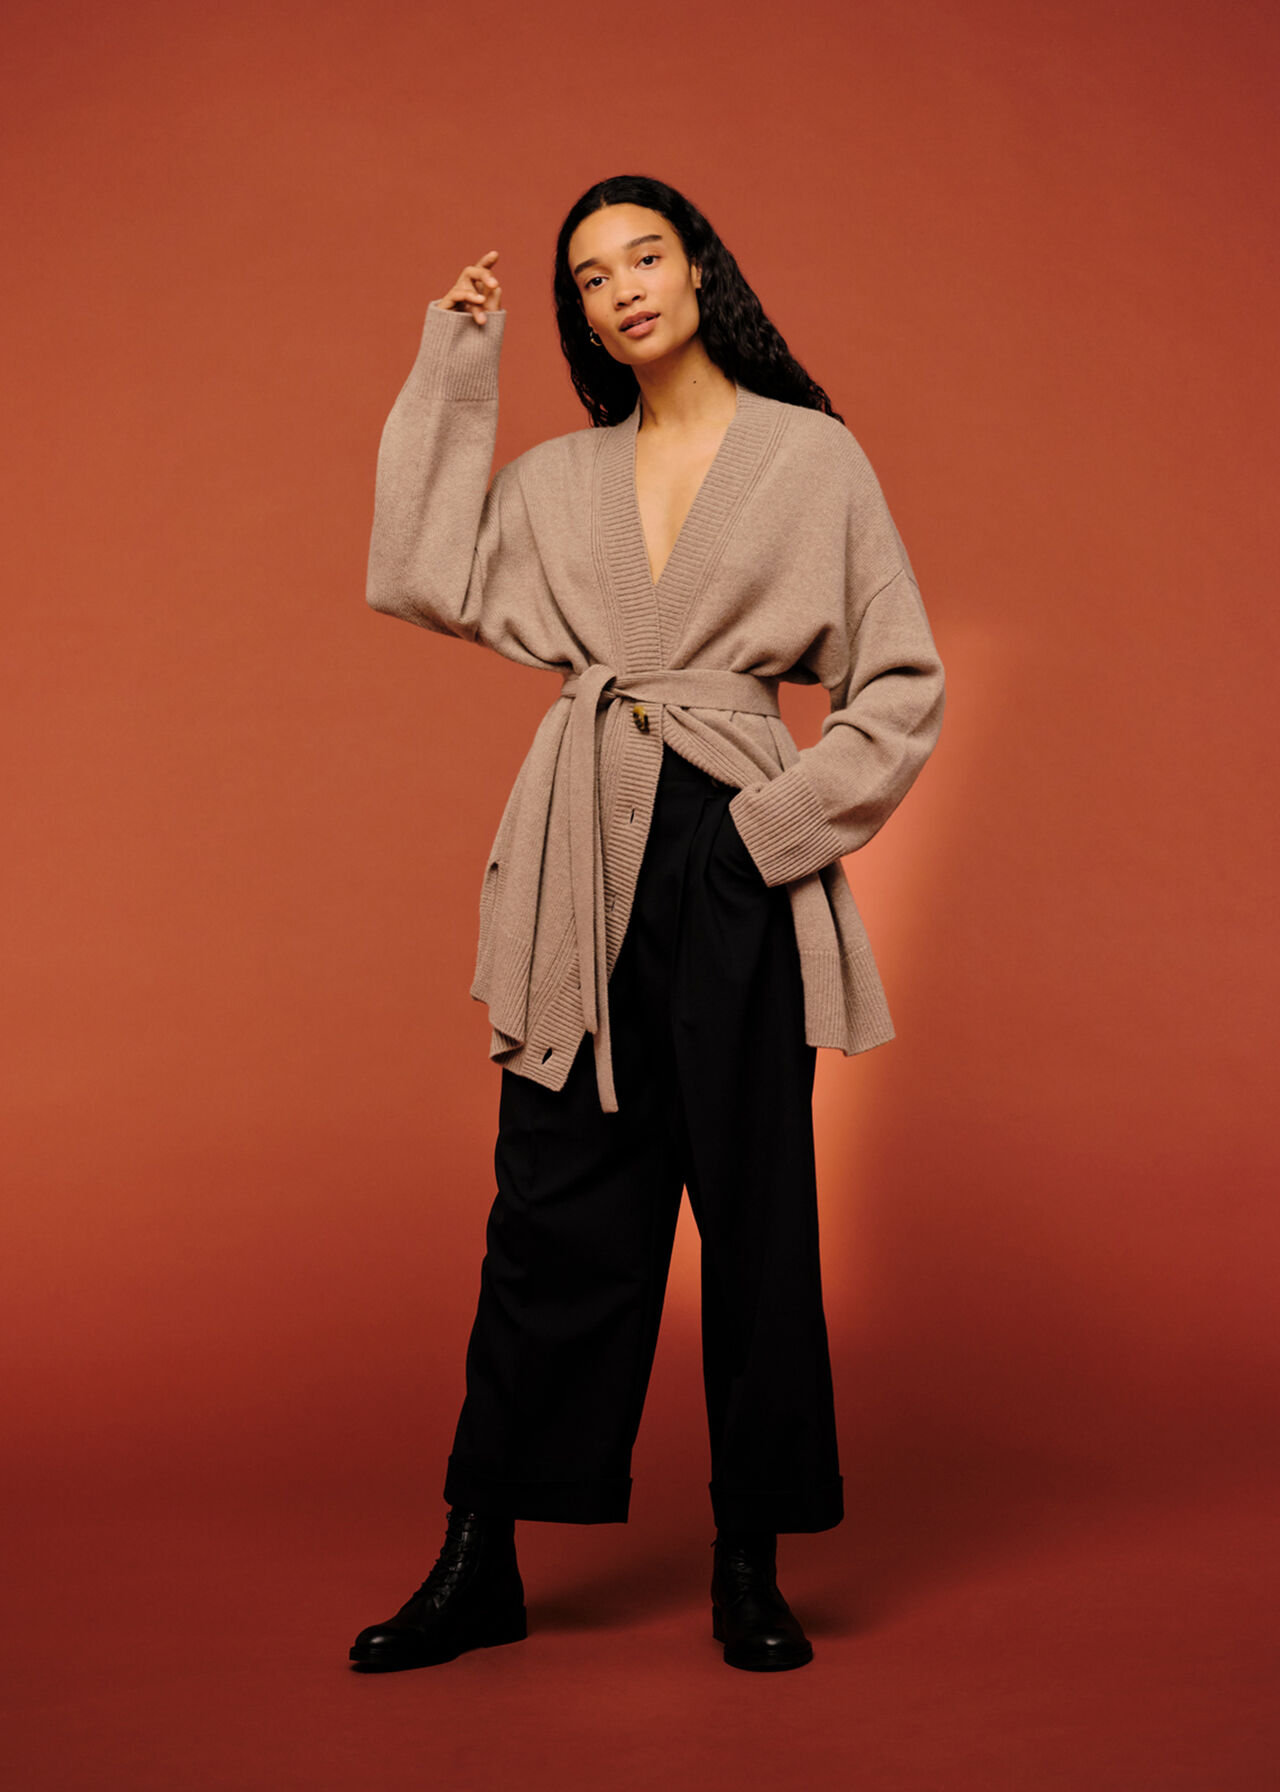 Belted Cashmere Cardigan